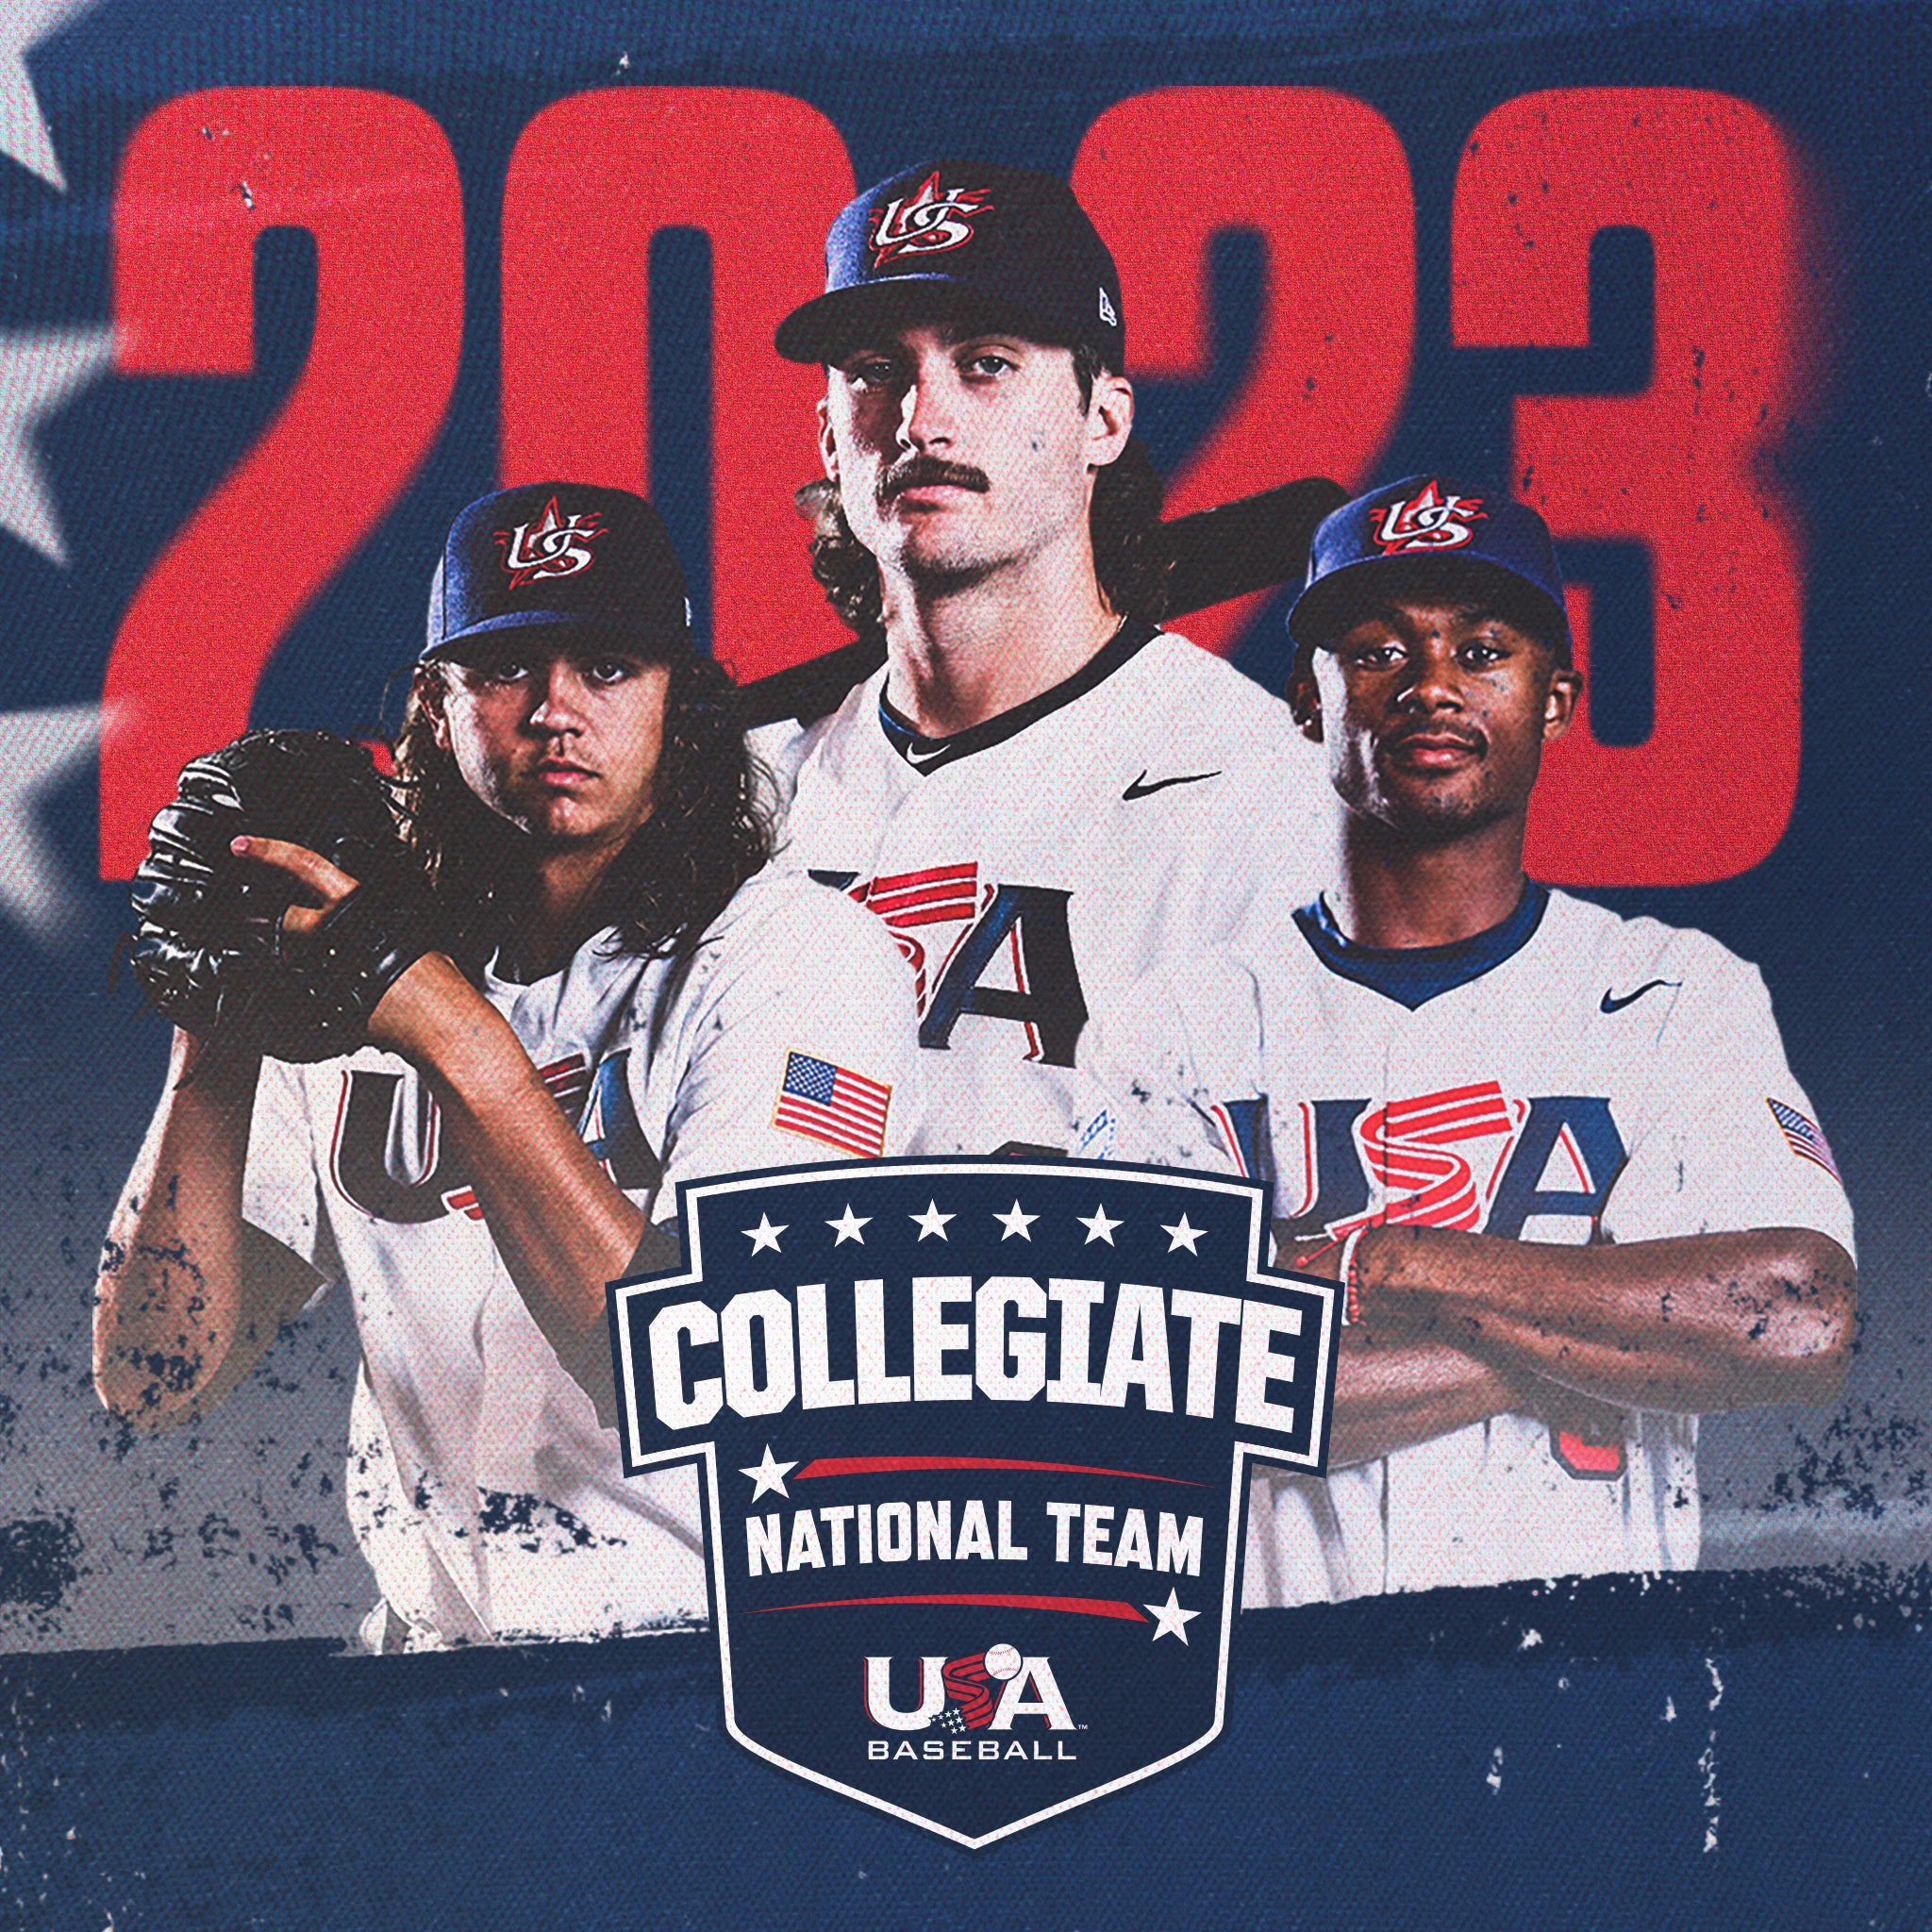 June 26th Admission: USA Baseball Collegiate National Team in Cary | Baseball Shop